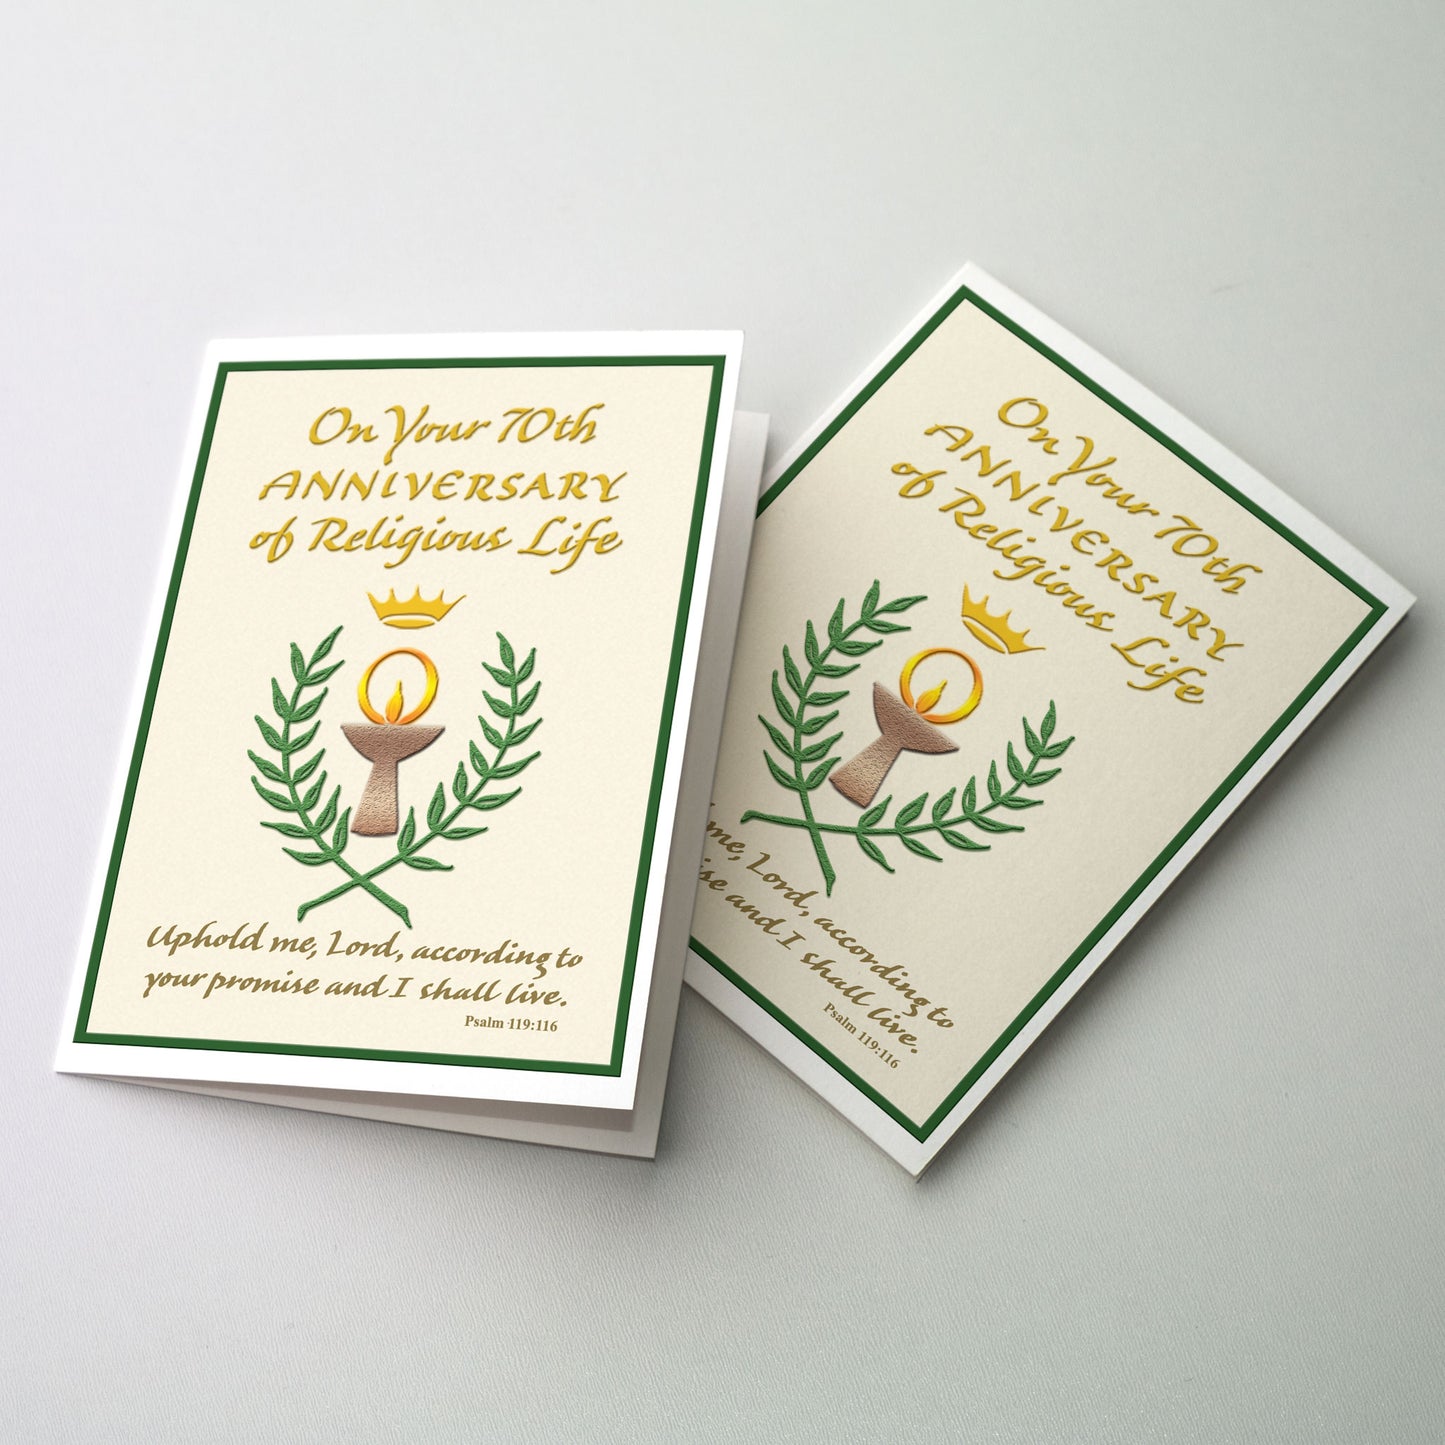 On Your 70th Anniversary of Religious Life - 70th Religious Profession Anniversary Card